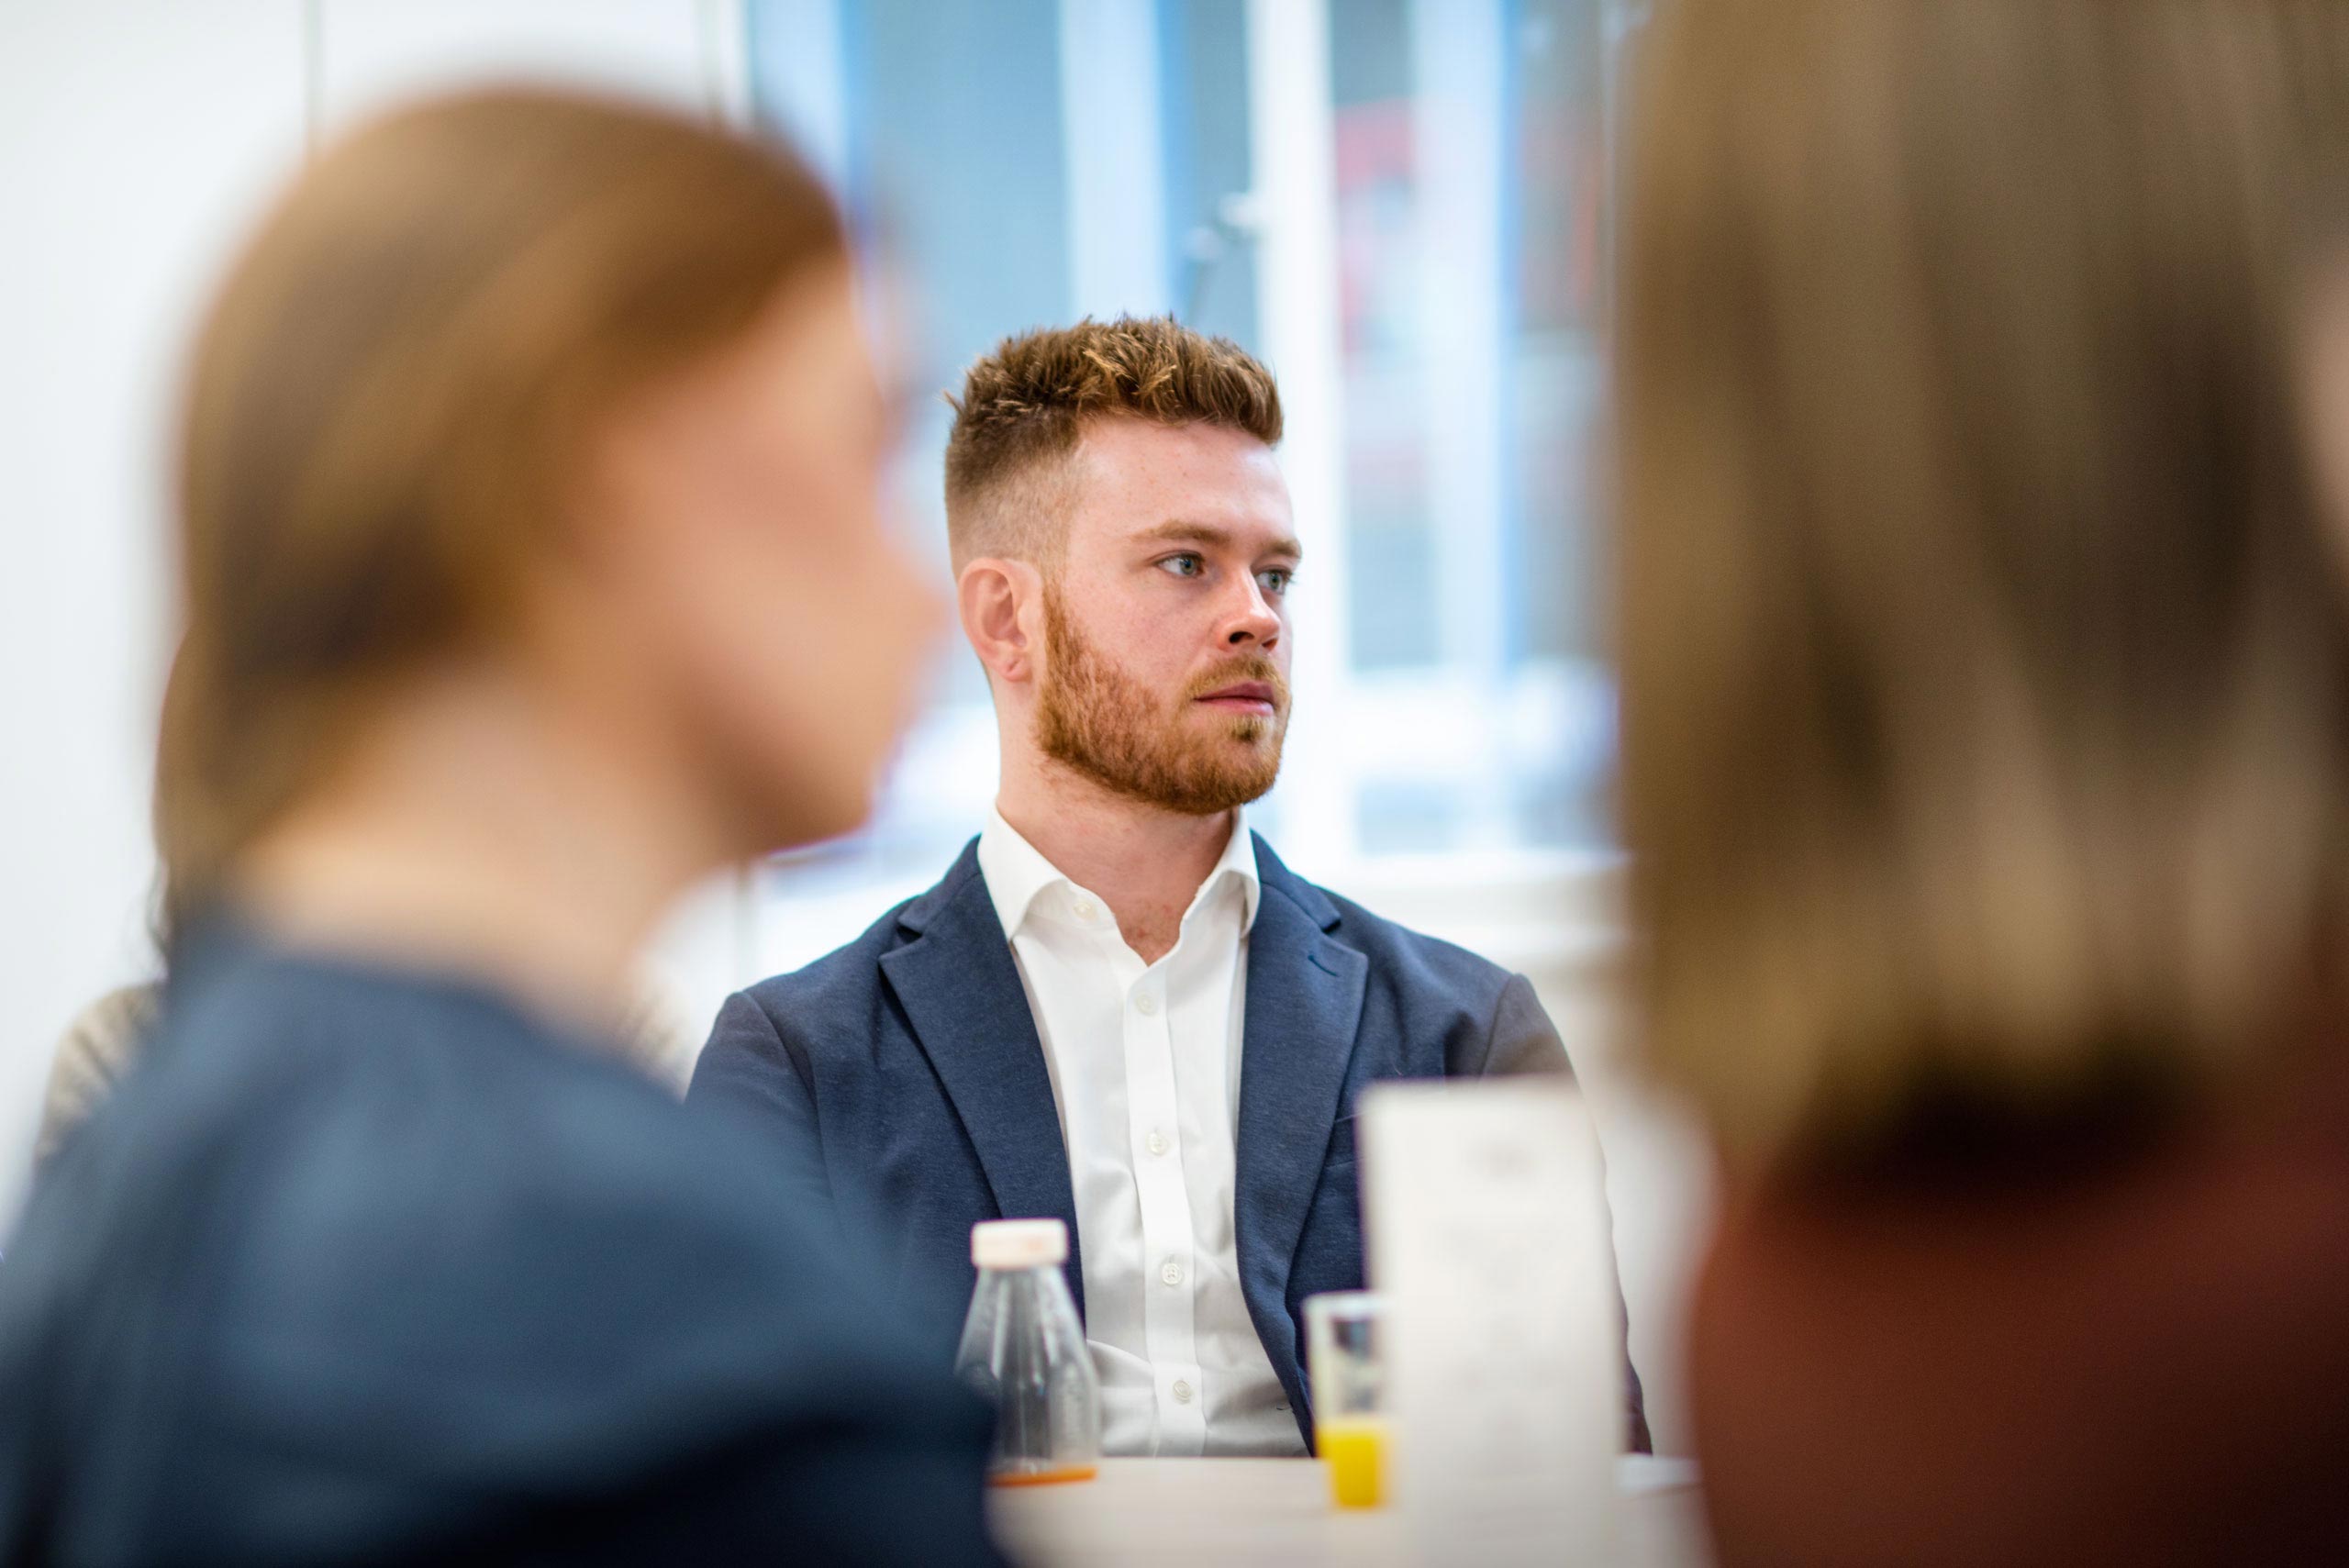 A young professional male looks on in an interesting manner during a presentation, captured in a reportage lifestyle style by Wright Content.